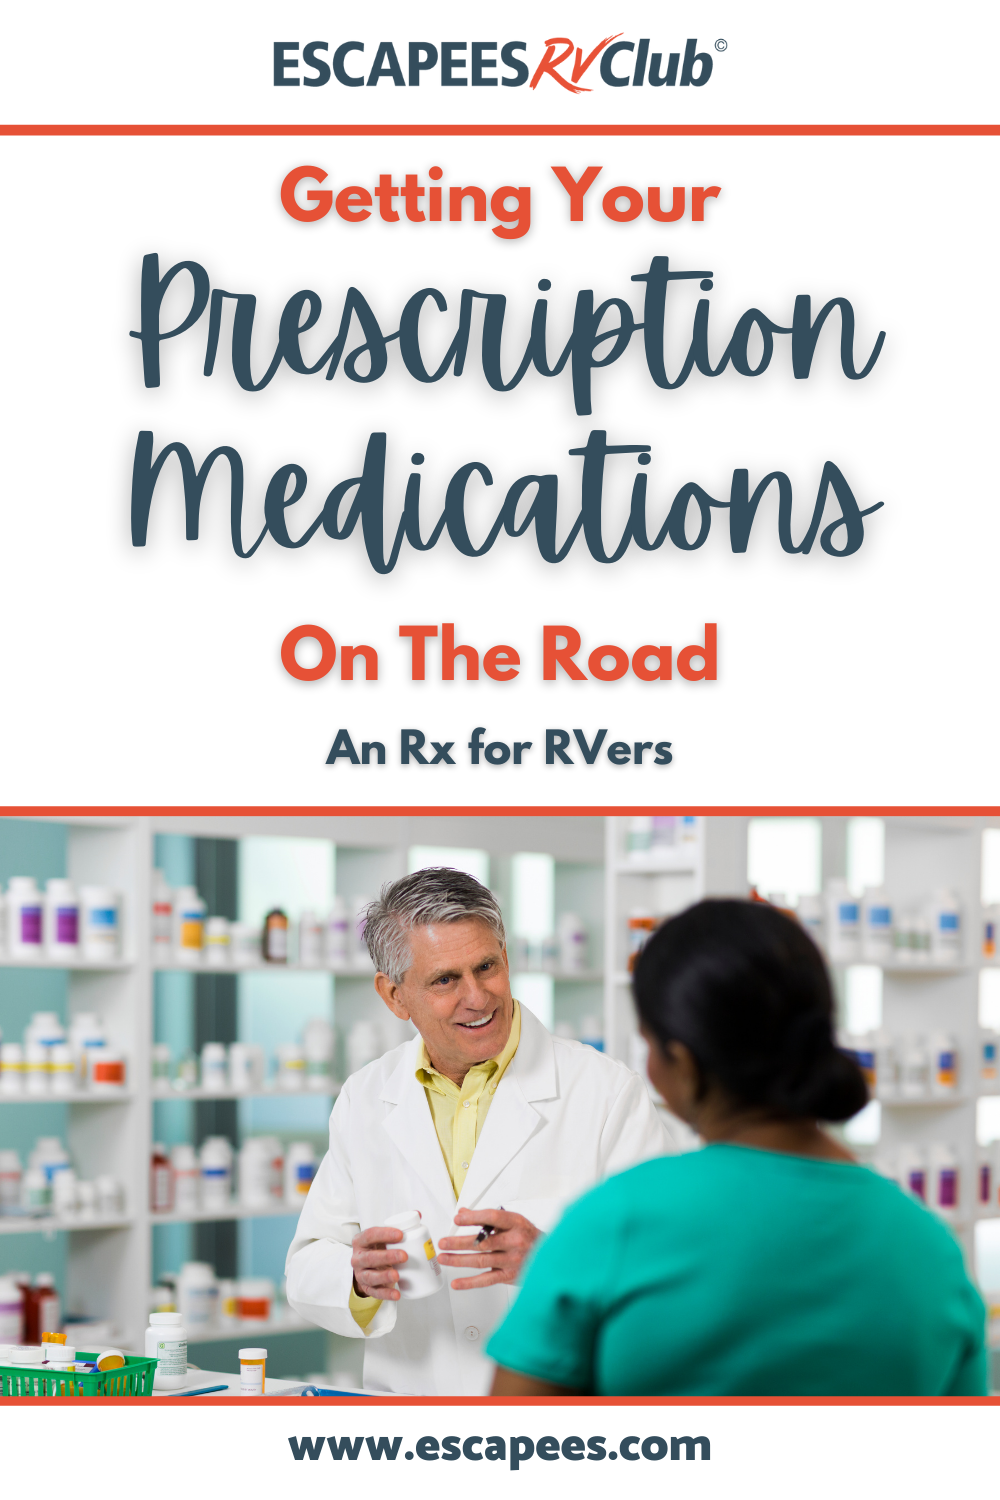 Getting Your Prescription Medications on the Road - An Rx for RVers 29